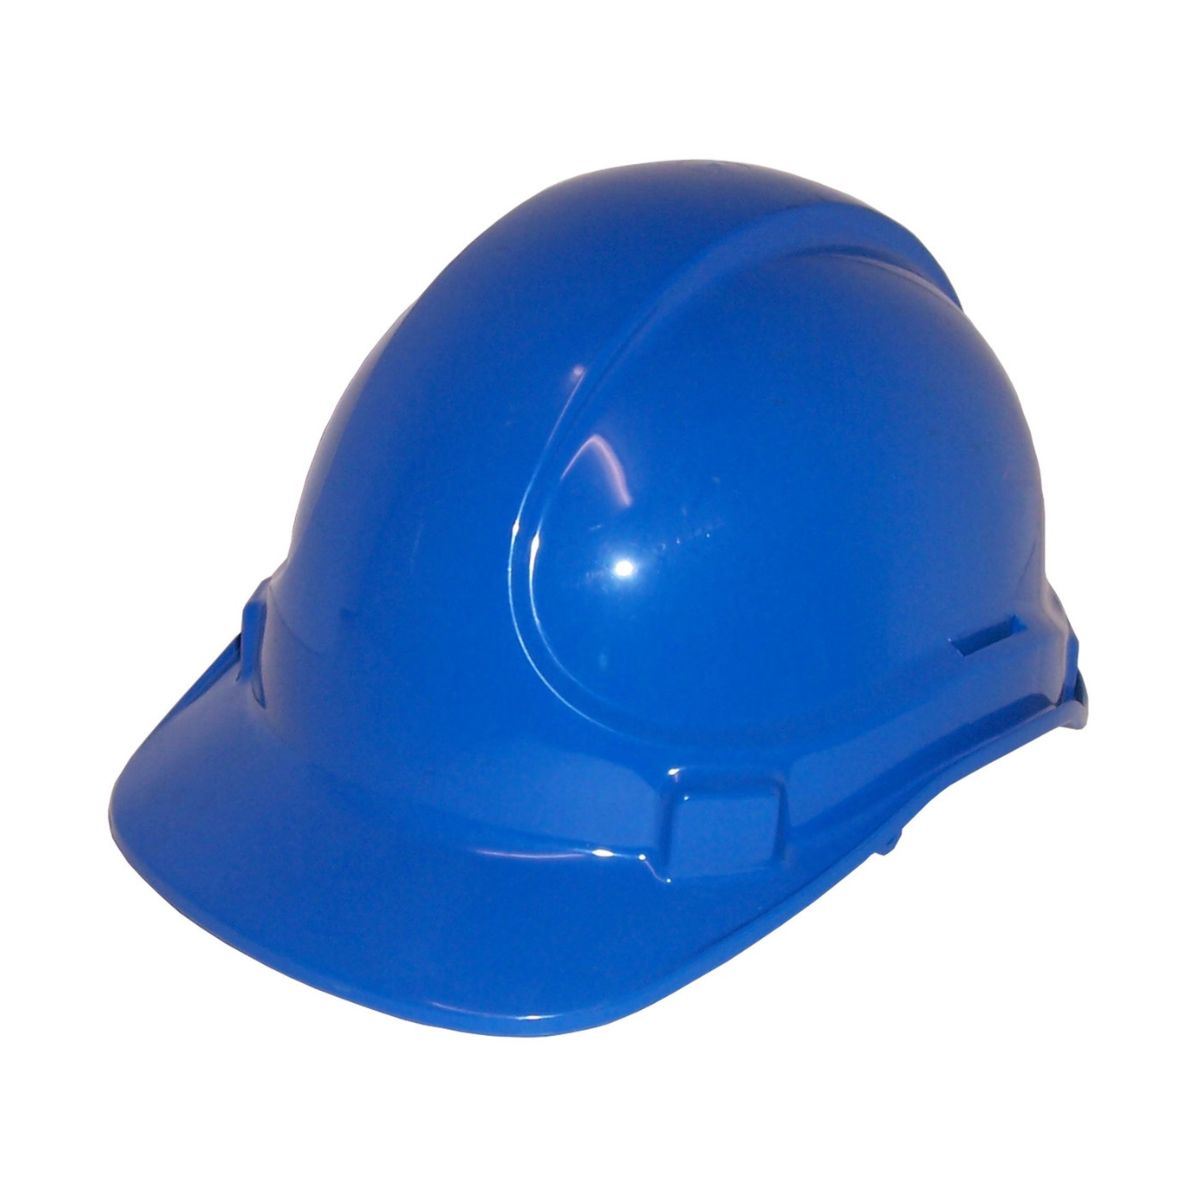 3M™ Safety Helmet ABS Unvented - Pinlock Harness TA560